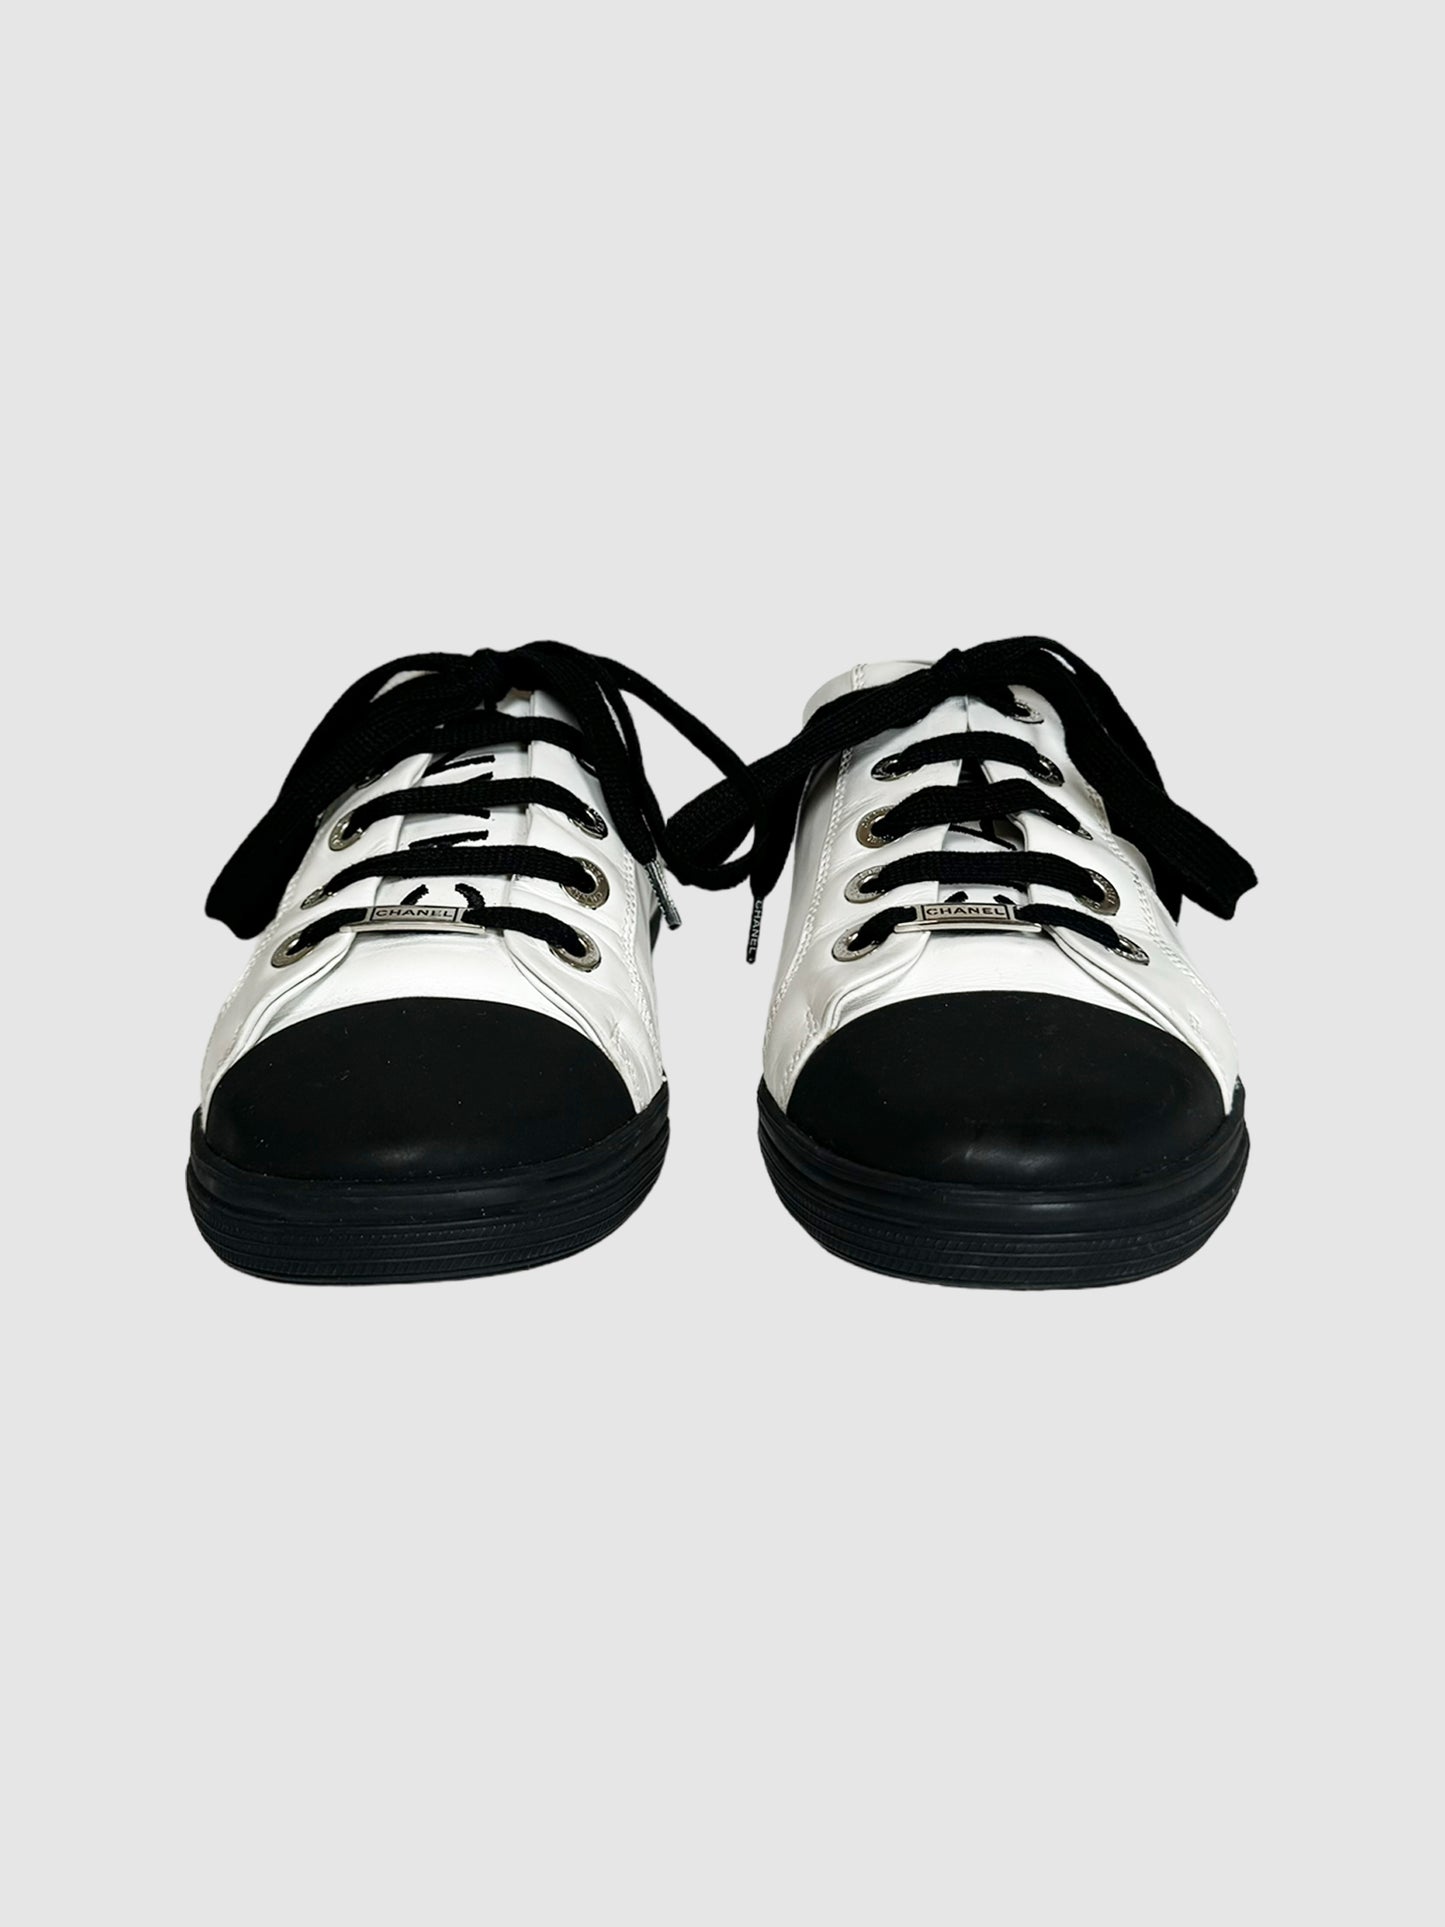 Chanel Leather Sneakers - Size 39.5